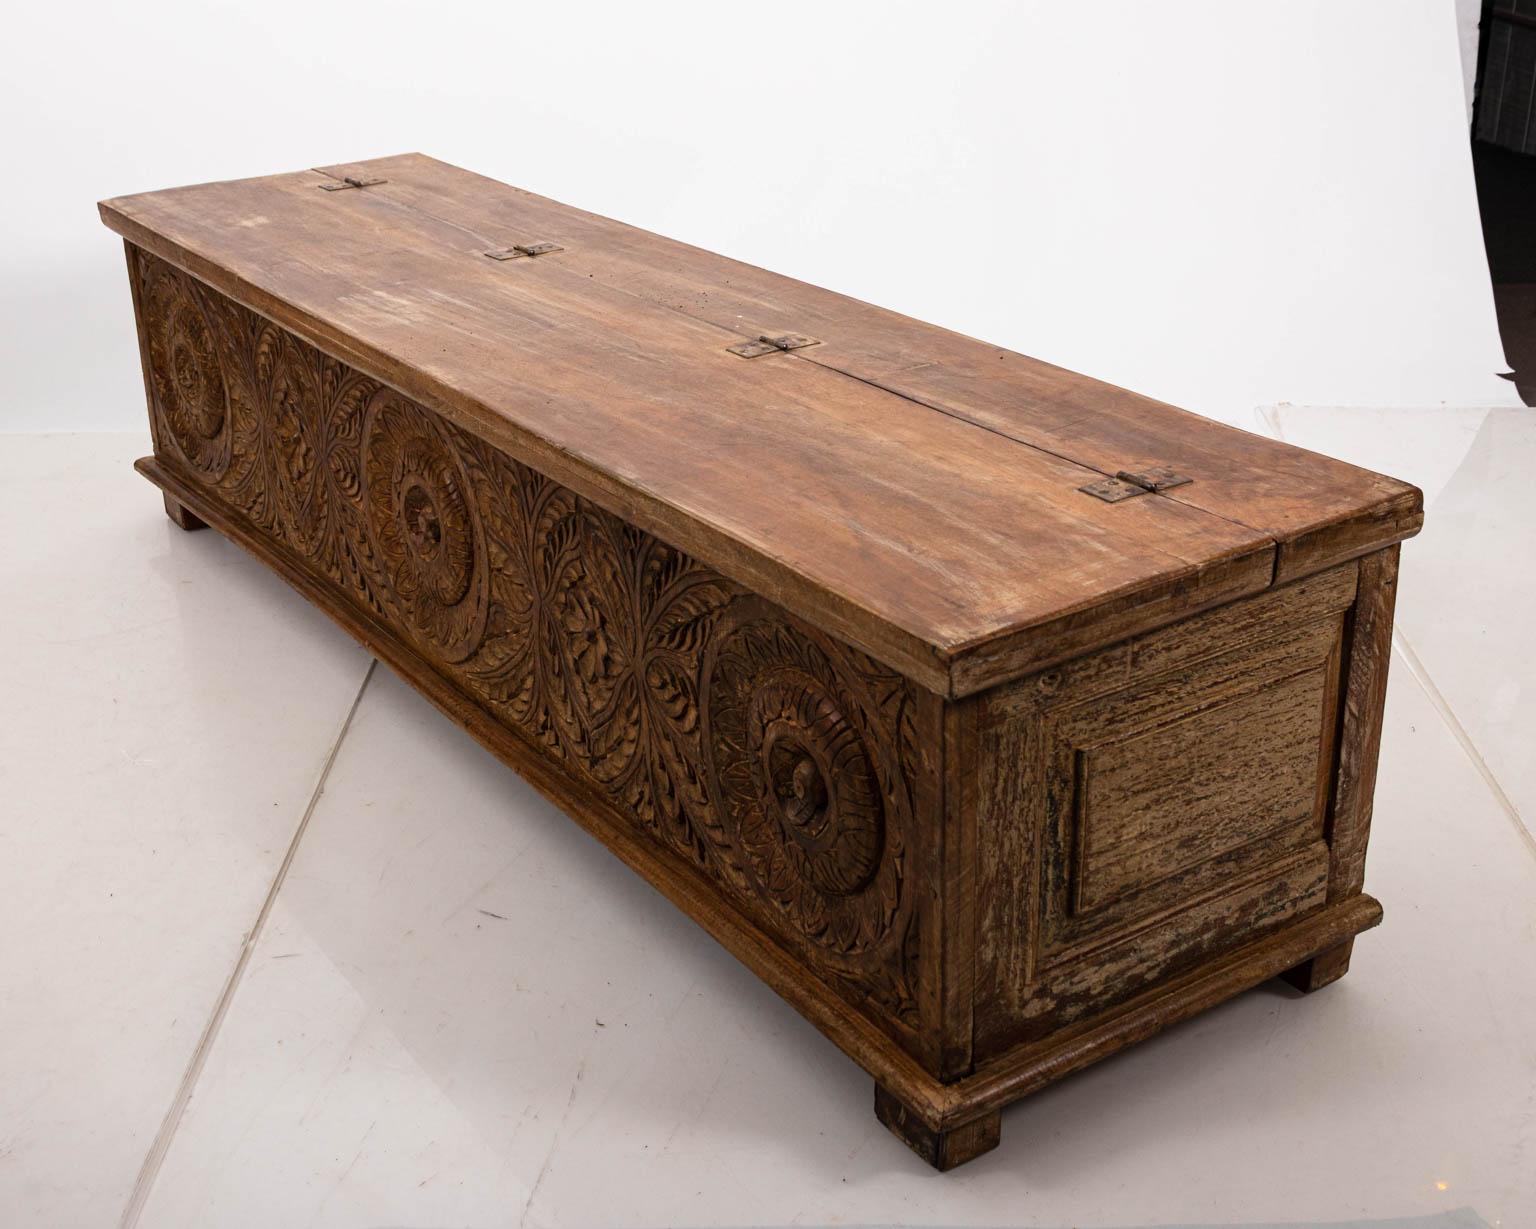 Carved wood storage box with hinged, lift top. The piece also features carved floral detail throughout. Please note of wear consistent with antique age including chips, wood loss, and scratches.